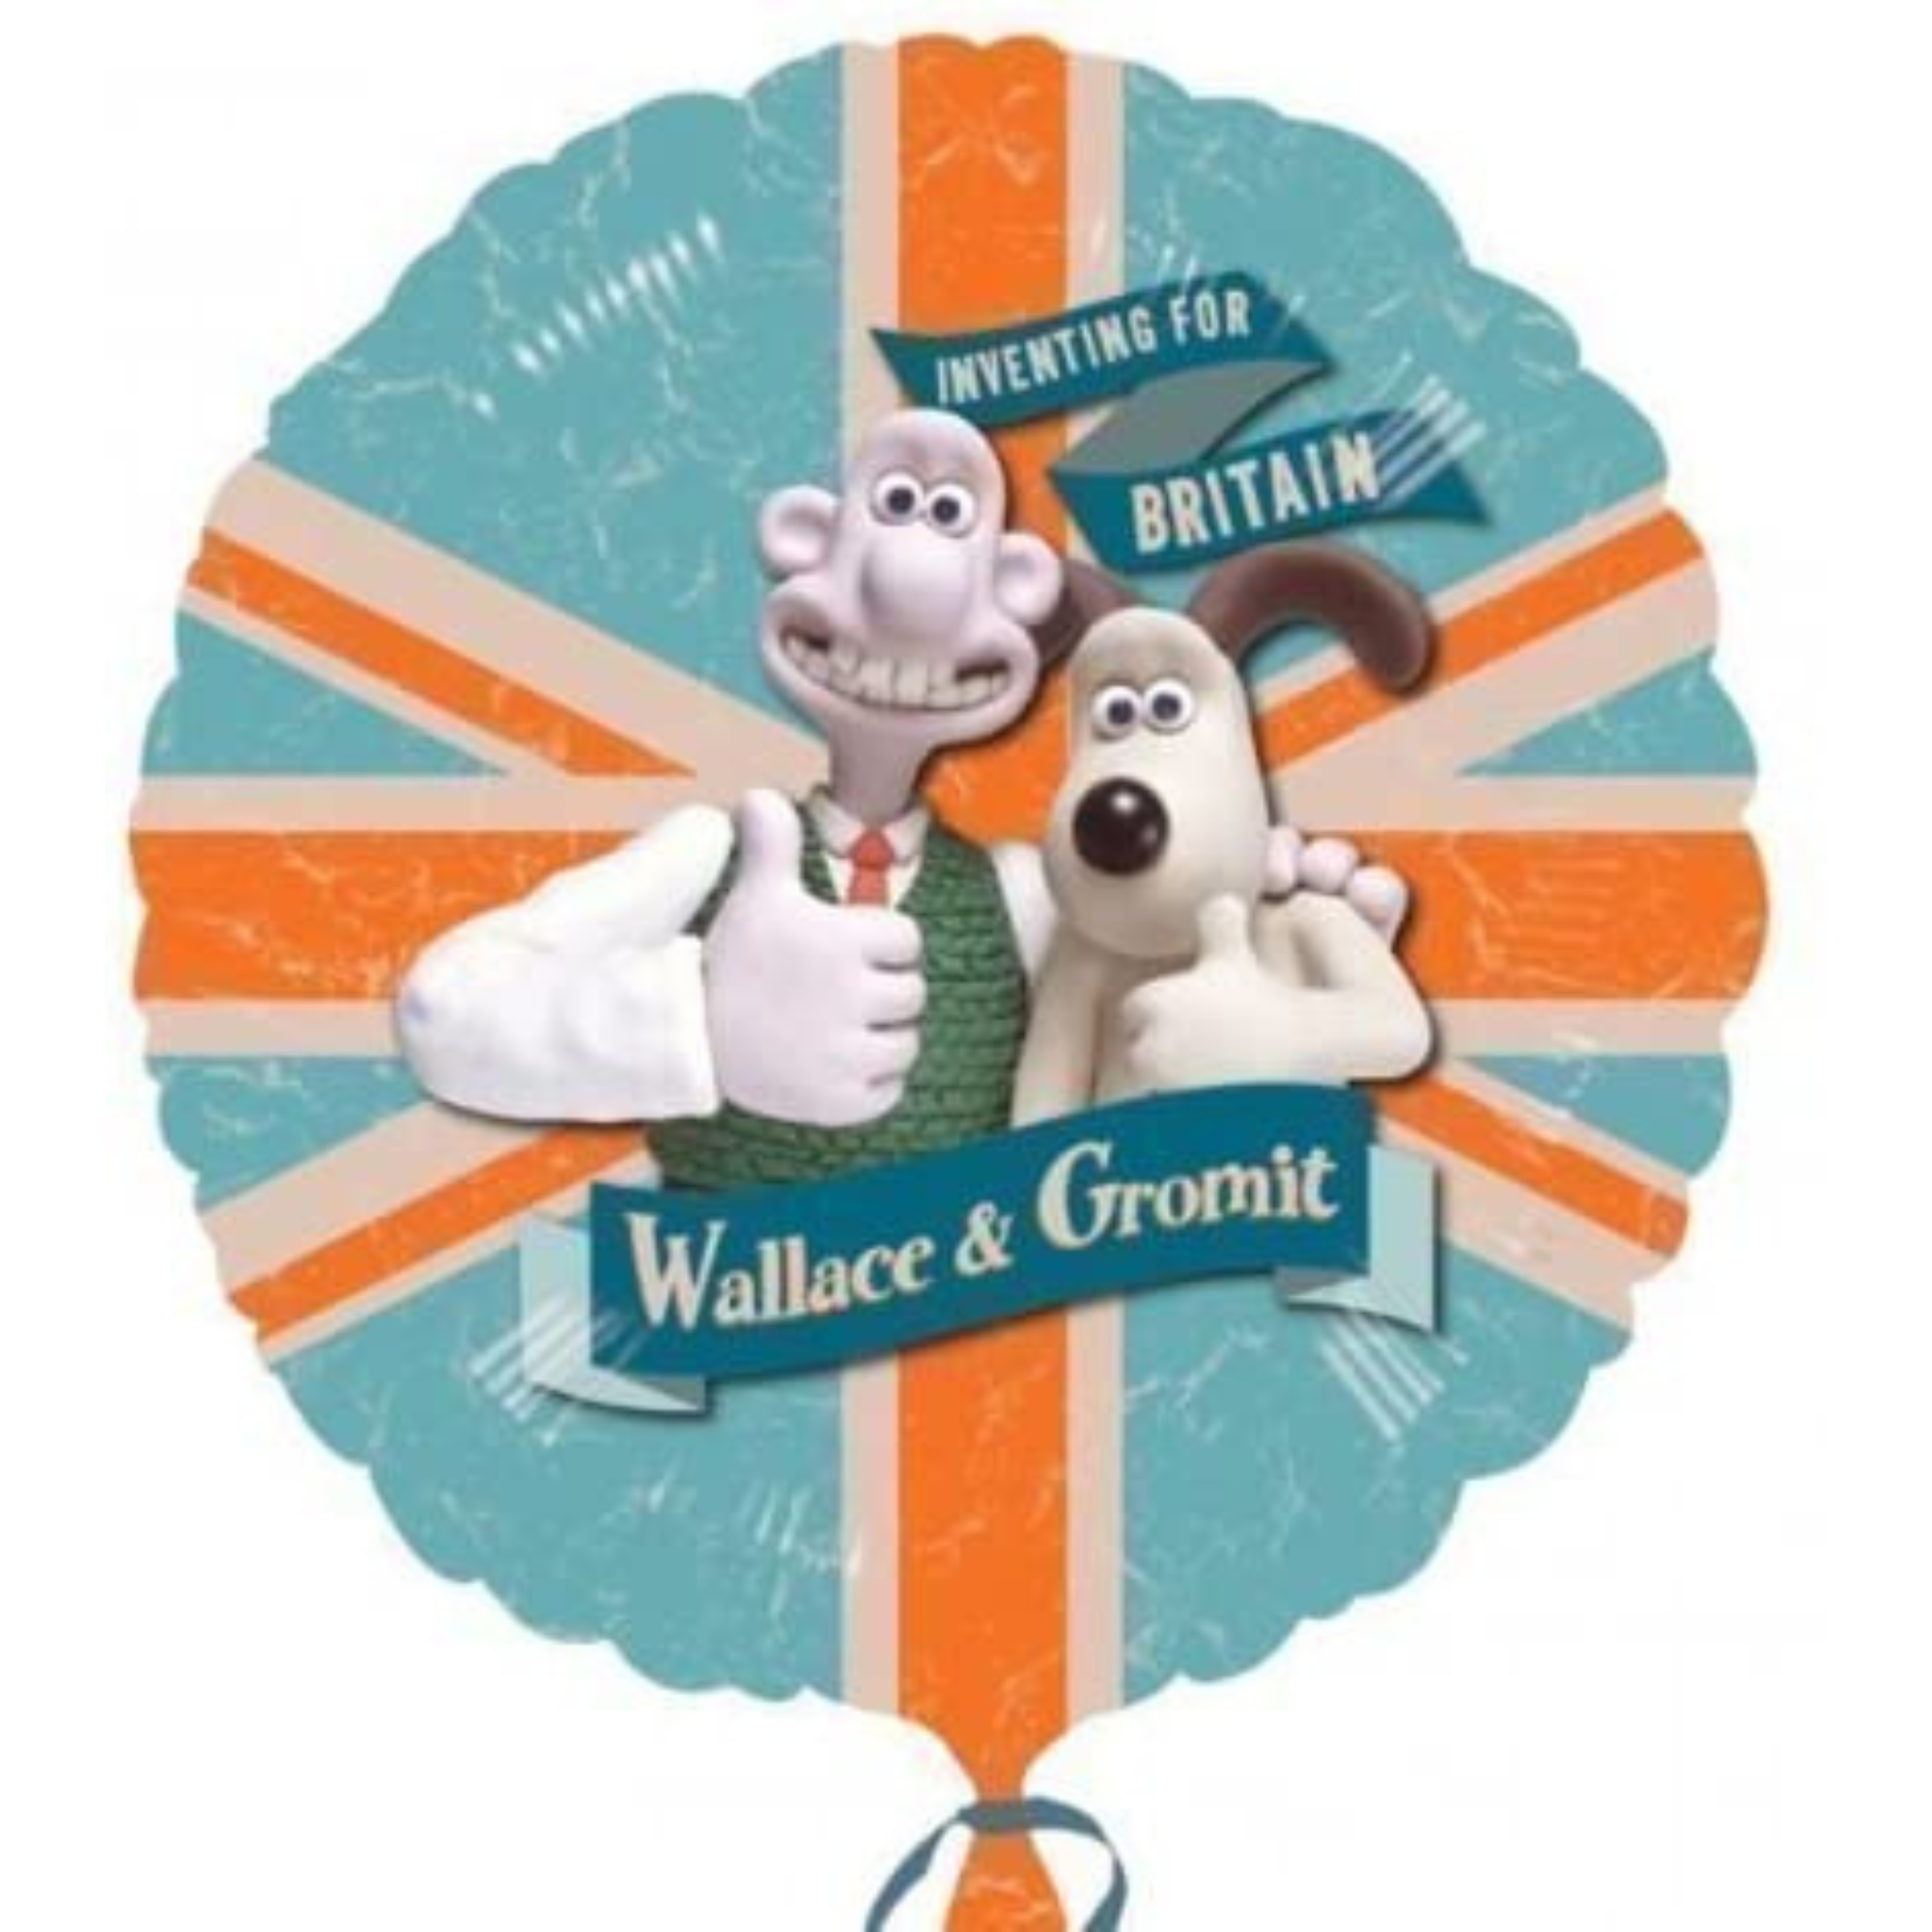 Wallace & Gromit Inventing for Britain 18 Inch Foil Celebration Balloon - Toptoys2u